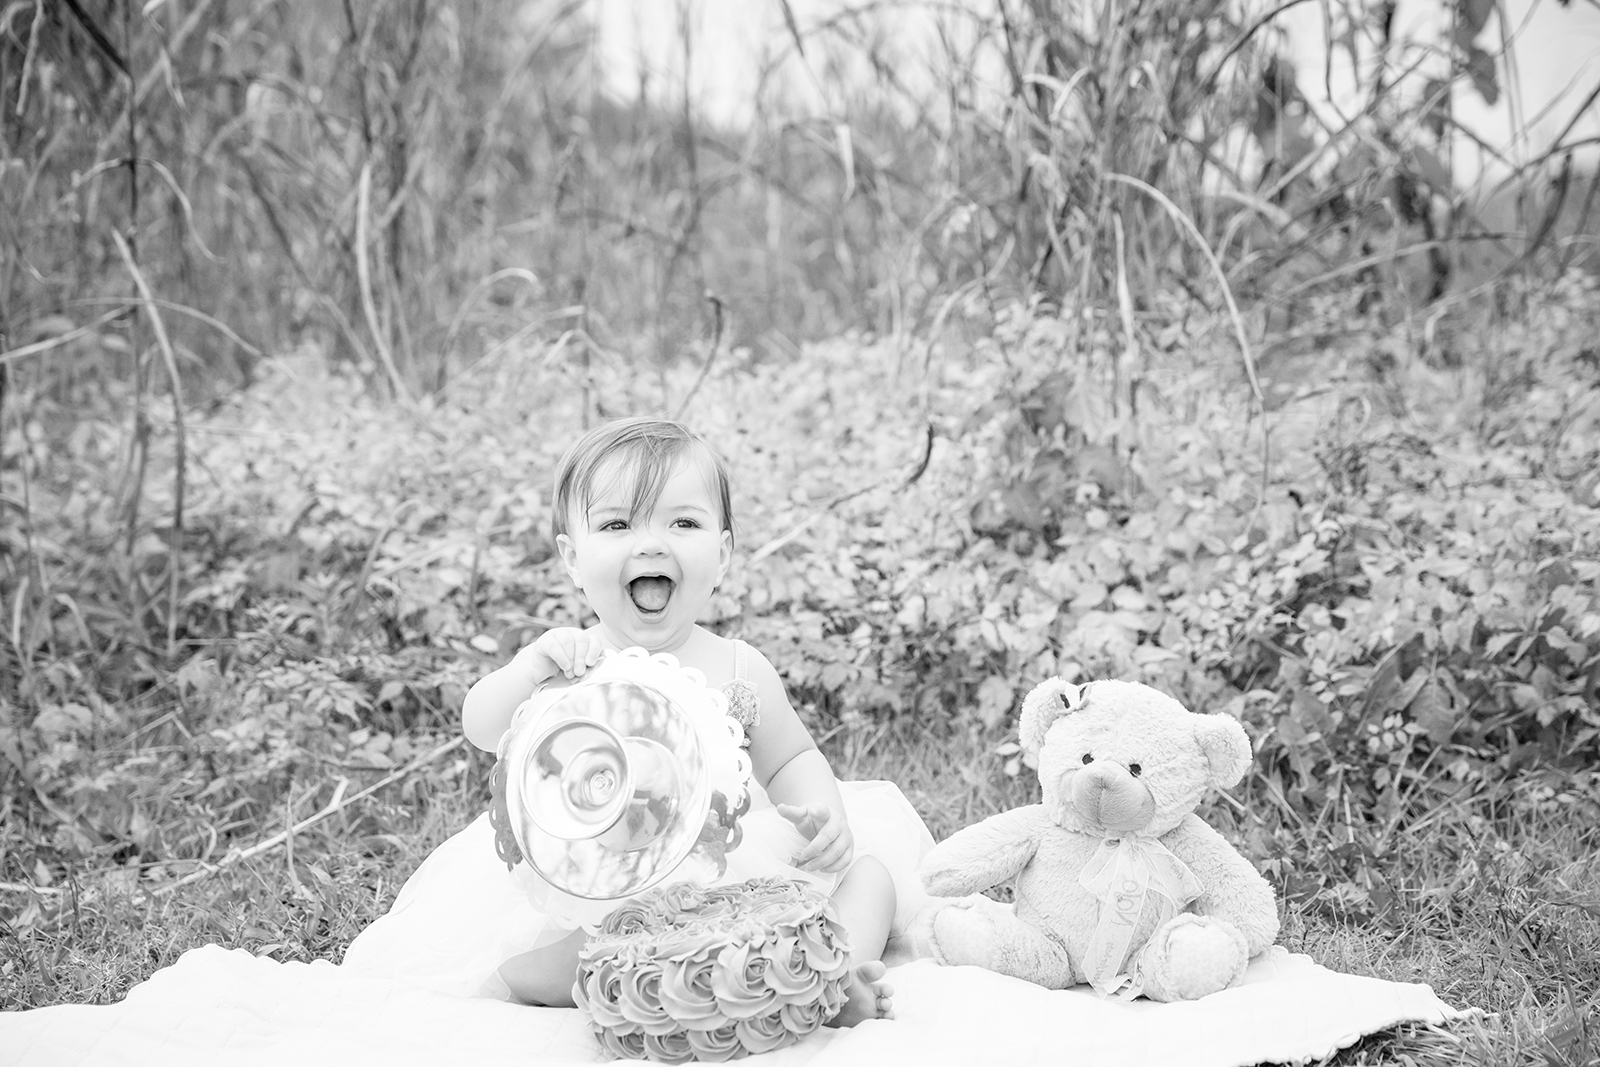 One Year Old Birthday Shoot in Powhatan Virginia  - Image Property of www.j-dphoto.com